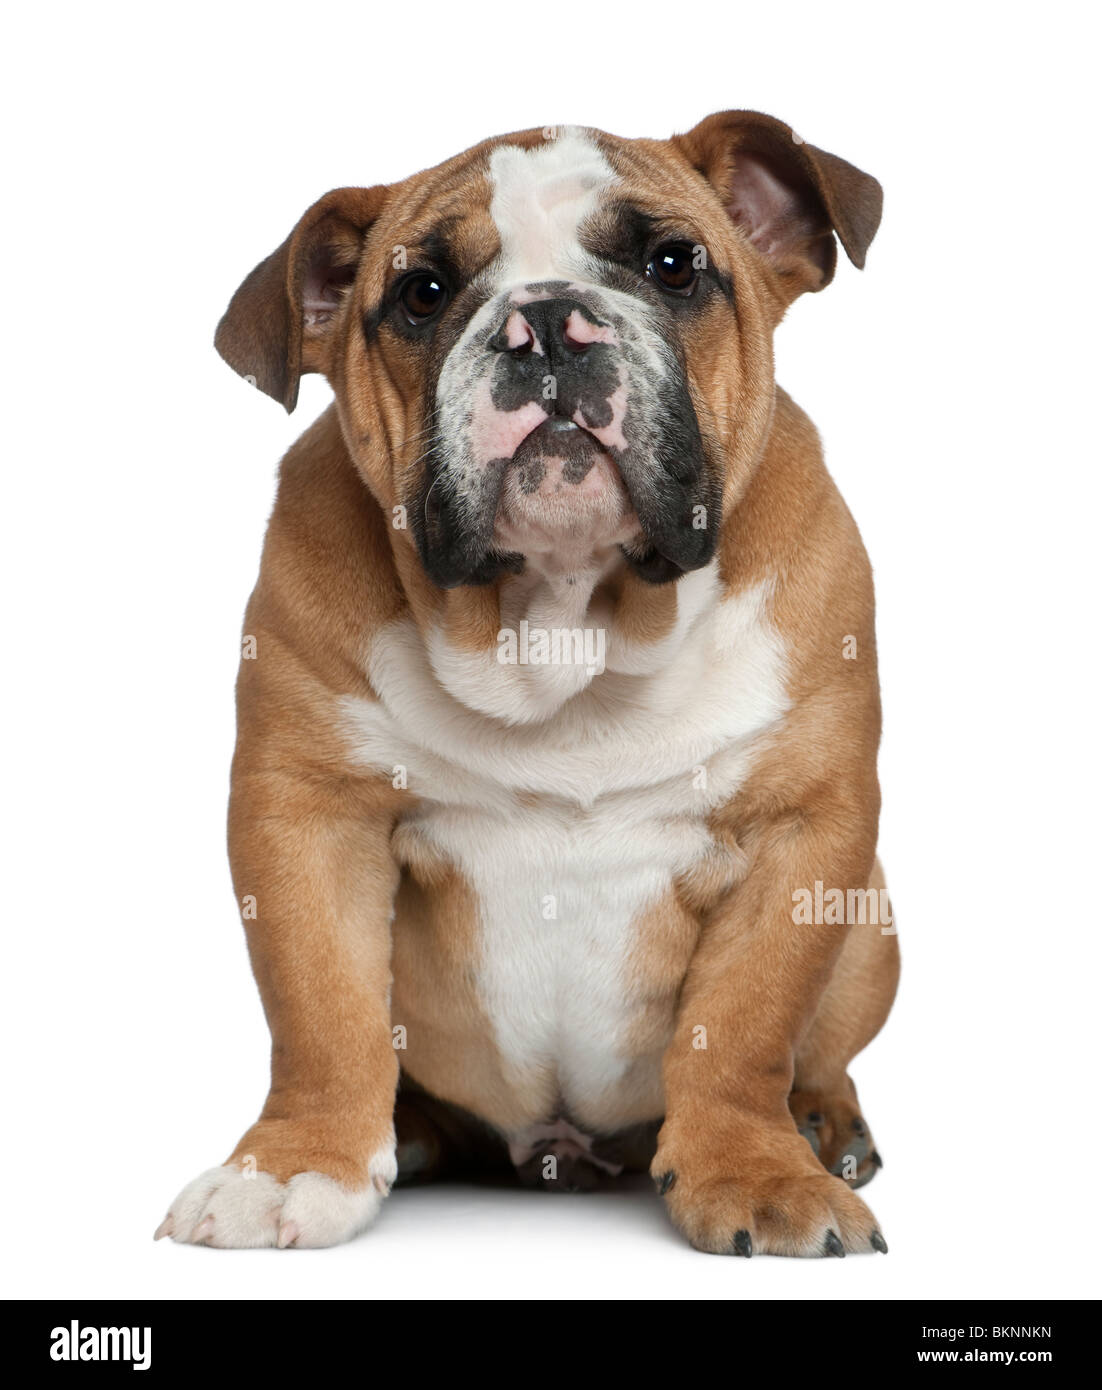 English bulldog puppy, 4 months old, sitting in front of white background Stock Photo